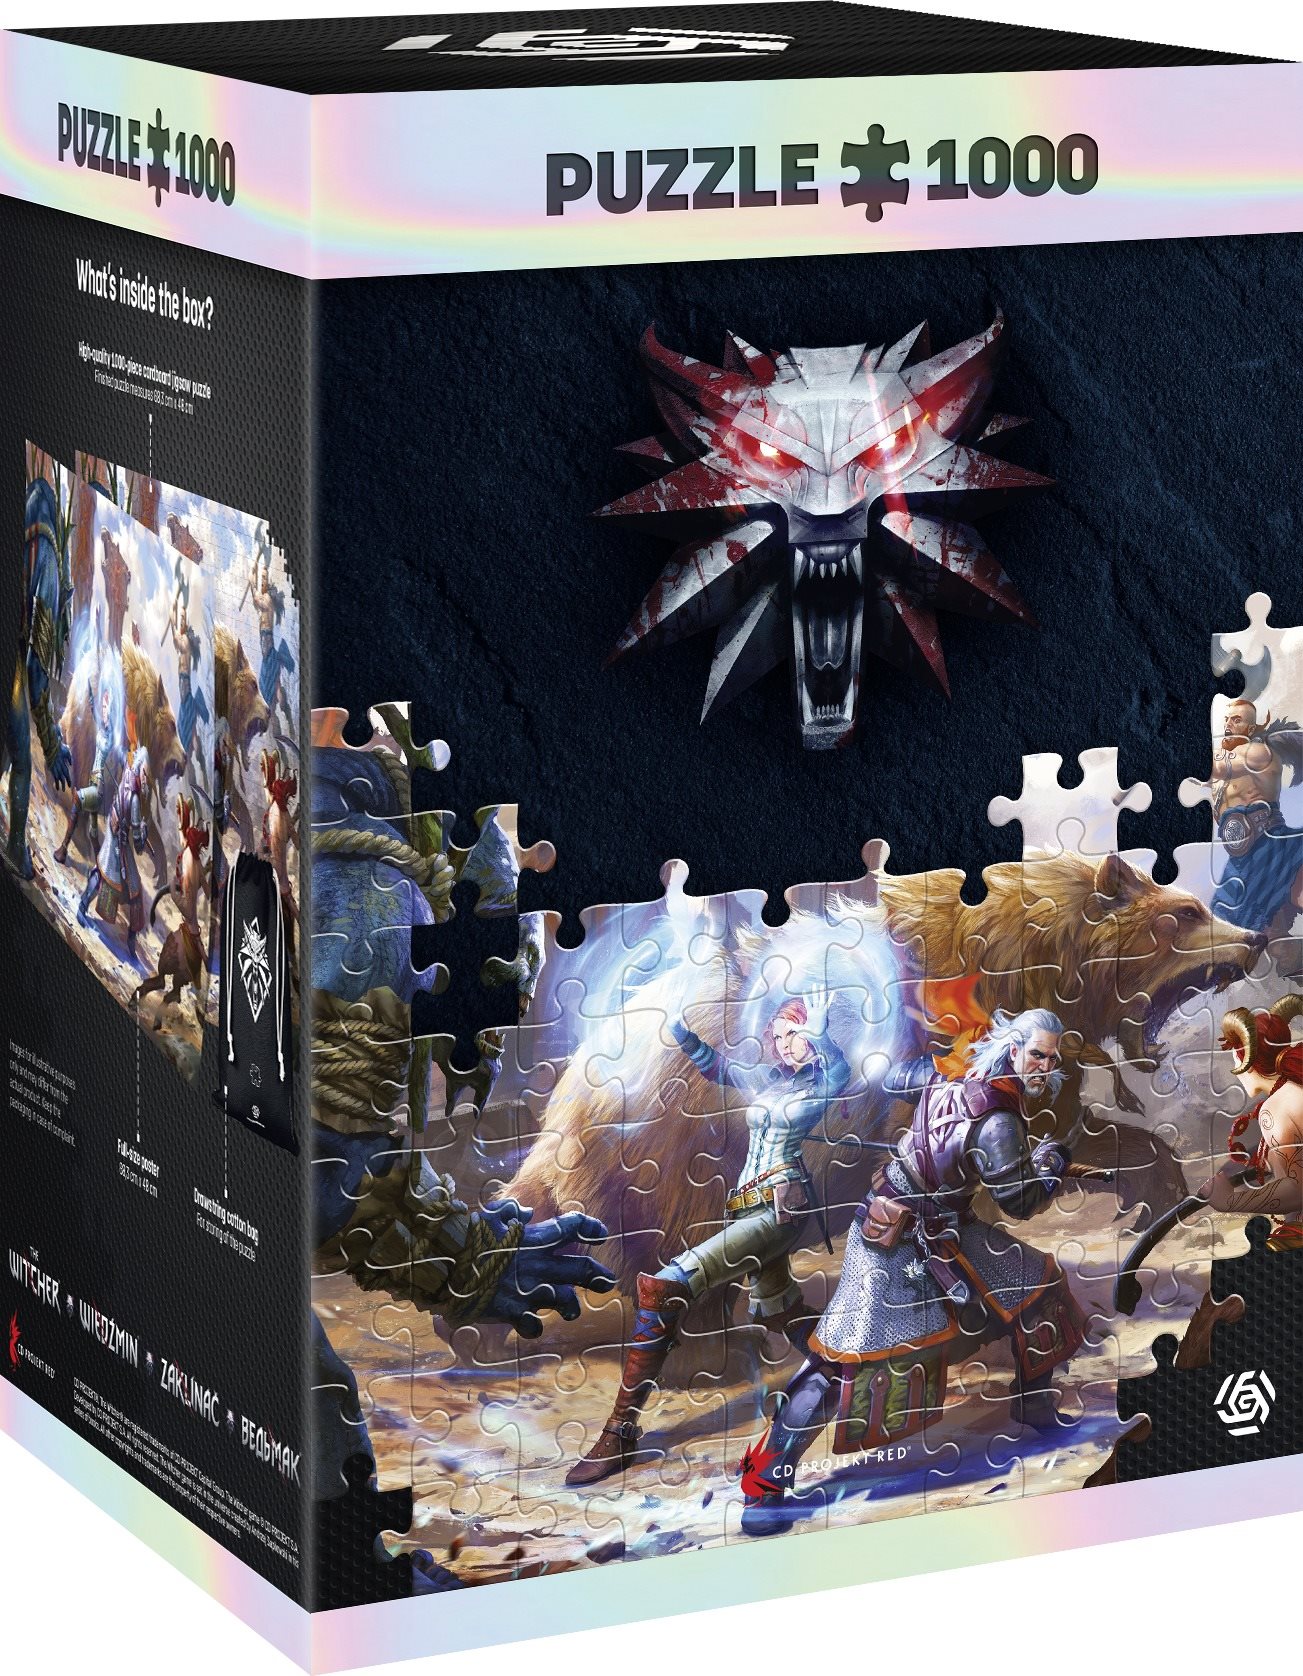 Puzzle The Witcher: Geralt and Triss in Battle - Puzzle